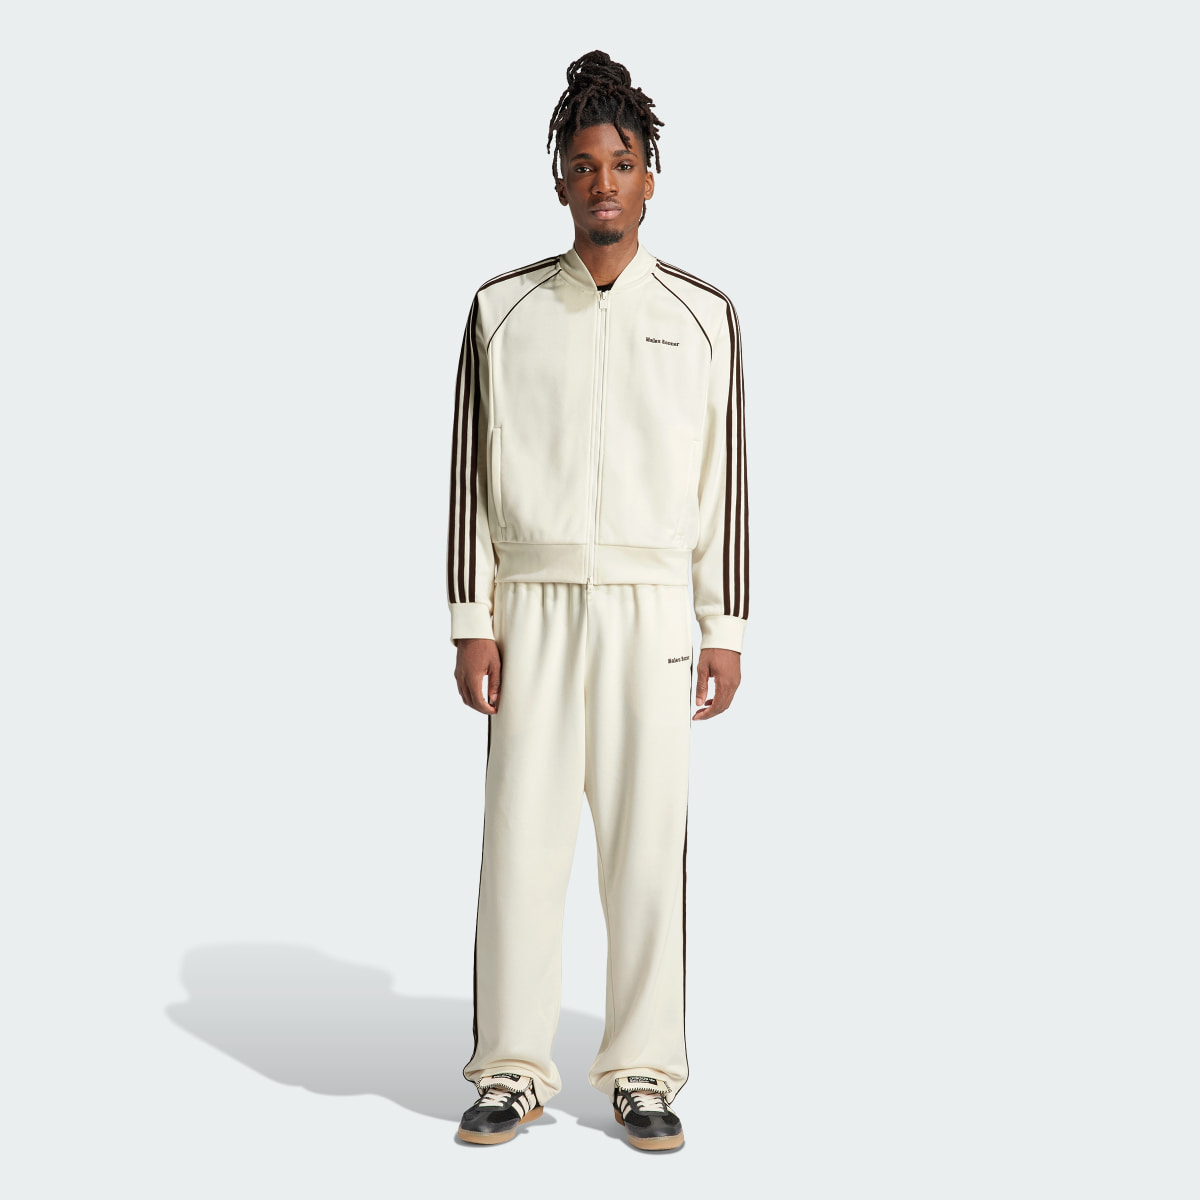 Adidas Statement Track Suit Joggers. 6